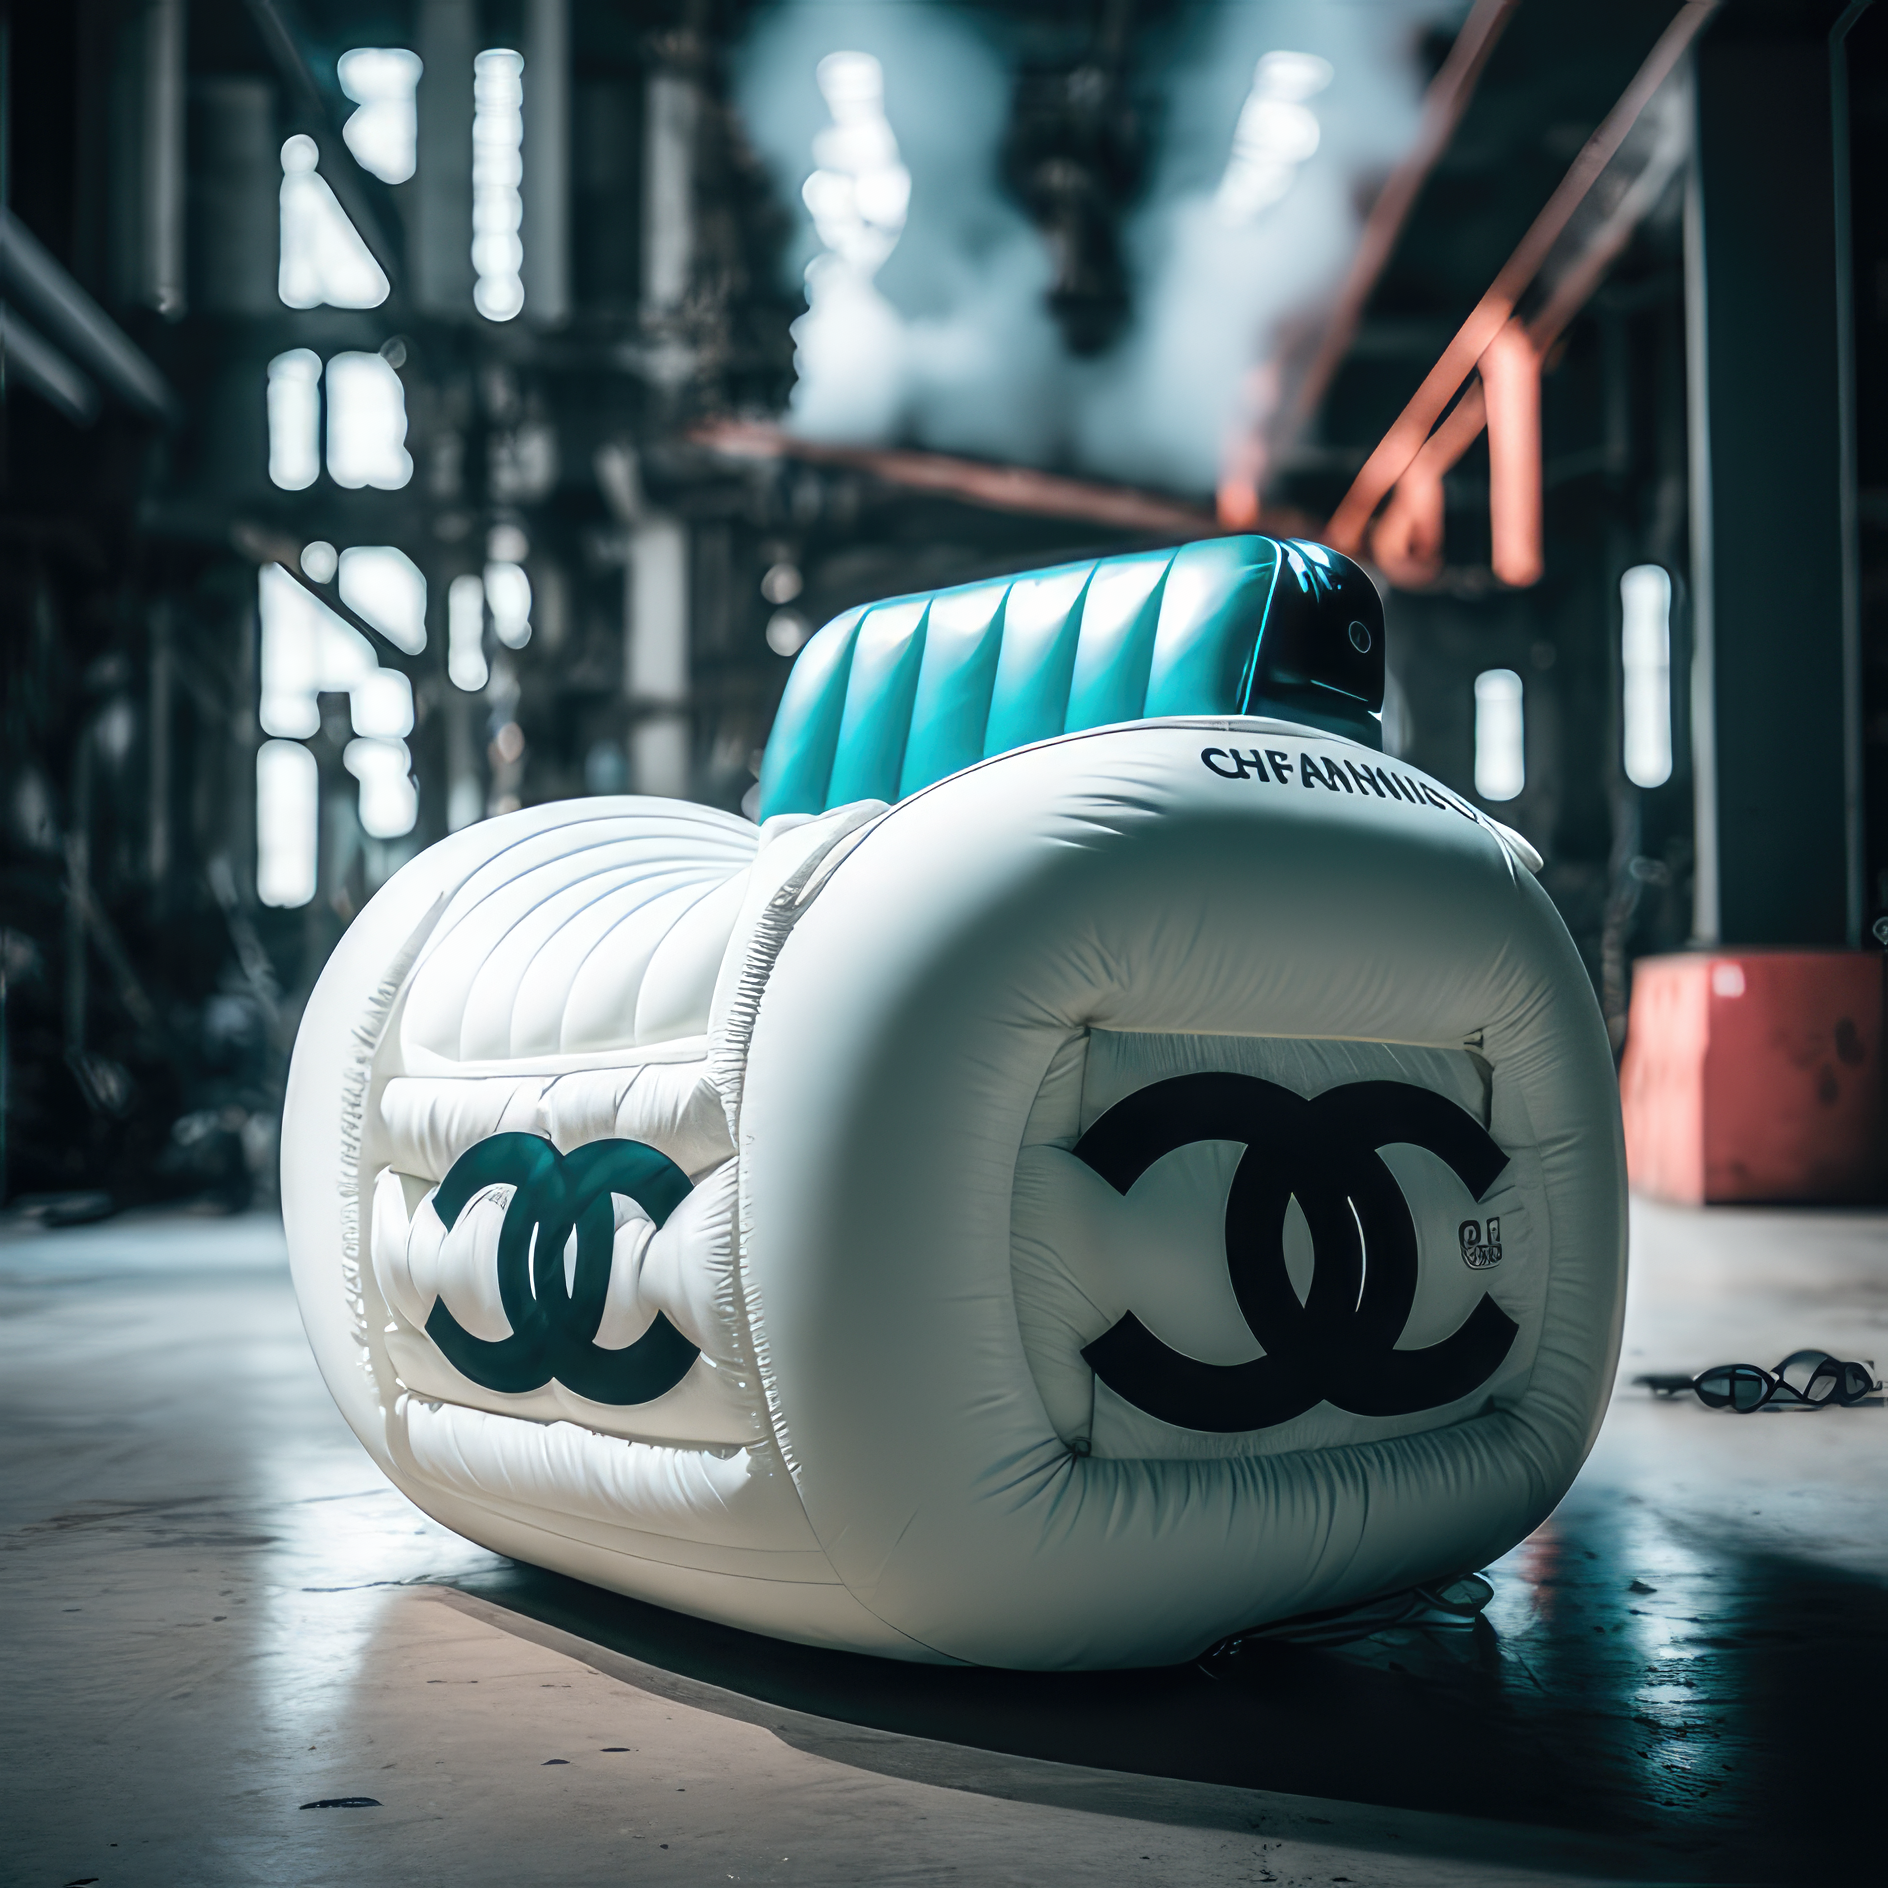 tonycncp_Heavily_branded_Chanel_Luxury_inflatable_chair_streetw_b95cb4d4-a9b8-49c6-9e23-a8d05d057c04-gigapixel-standard-scale-4_00x.png